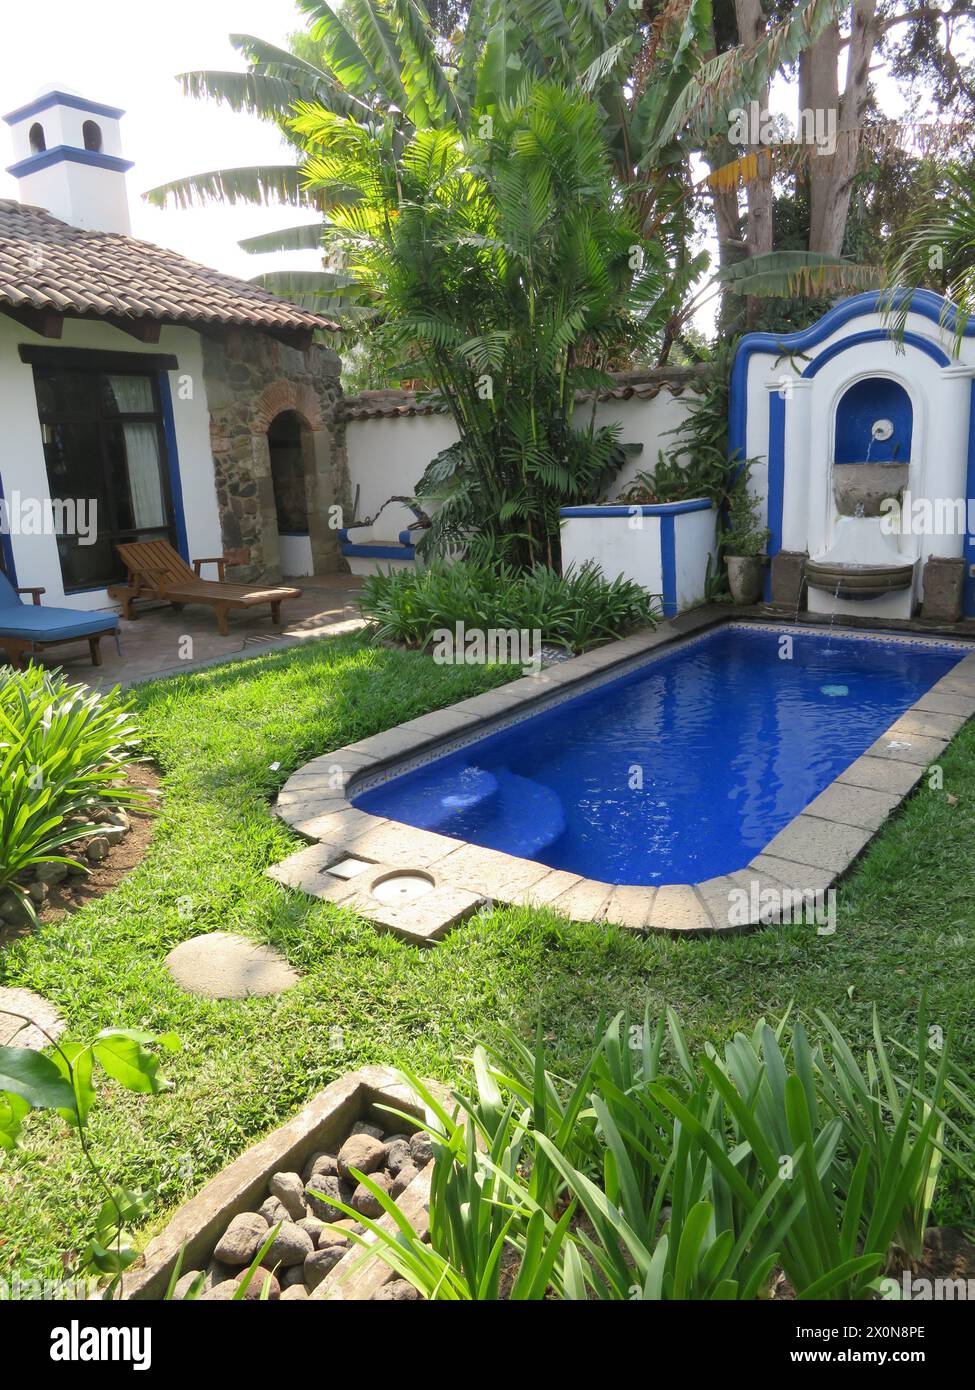 Casa Encantada .Plunge pool and peaceful garden of a  boutique small, intimate hotel in Antigua, once the capital of Guatemala, Central America. Stock Photo